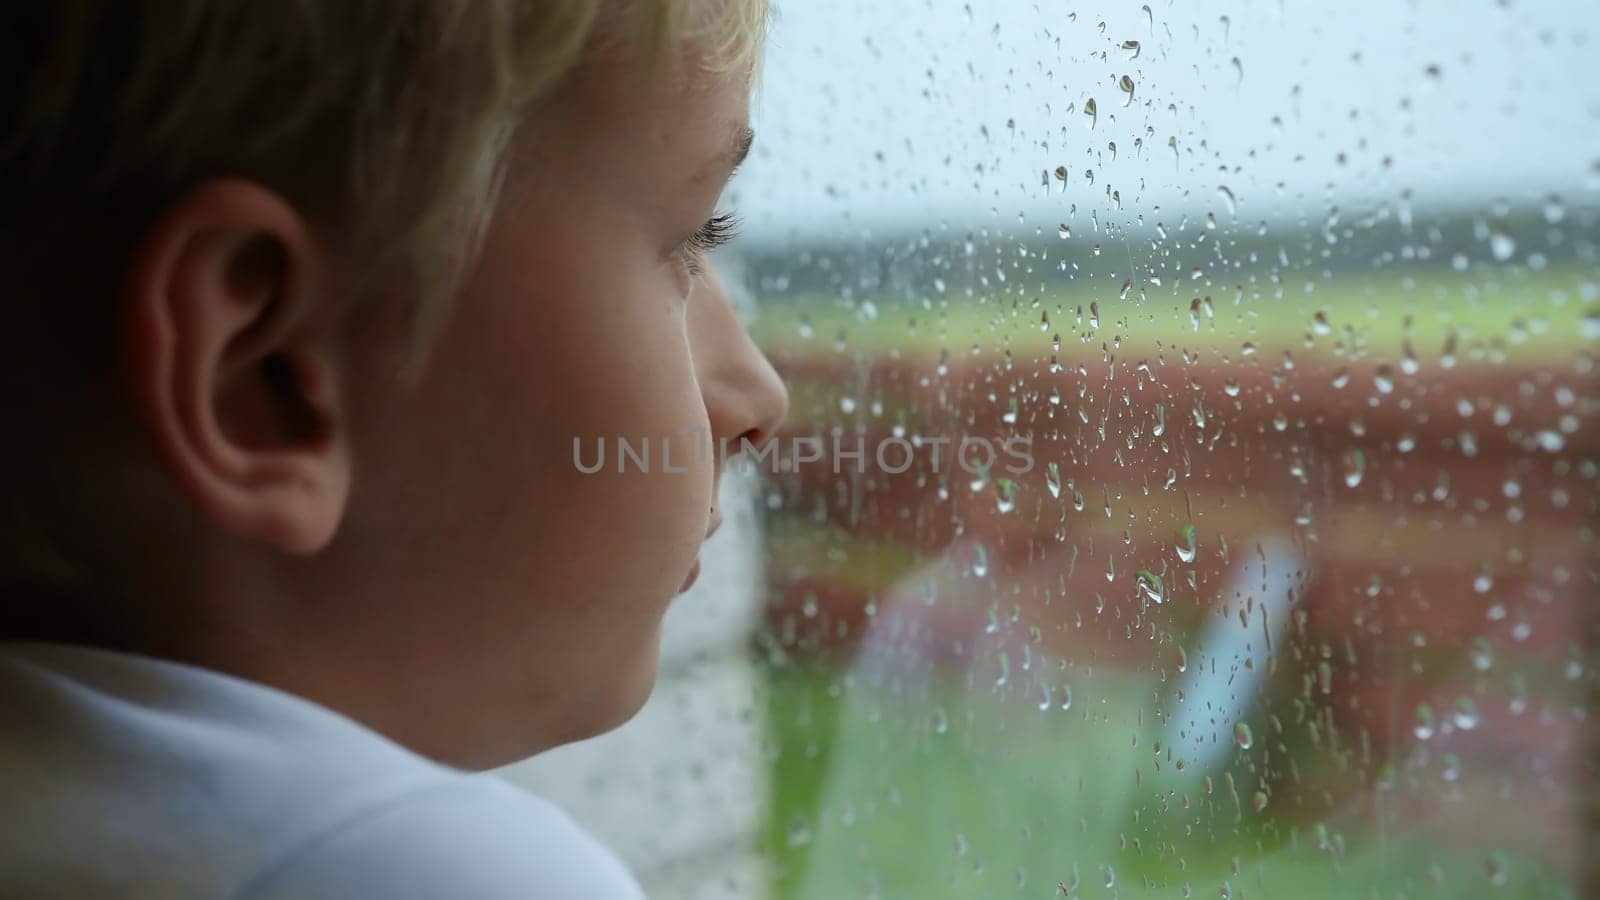 A little boy looks out the window during the rain